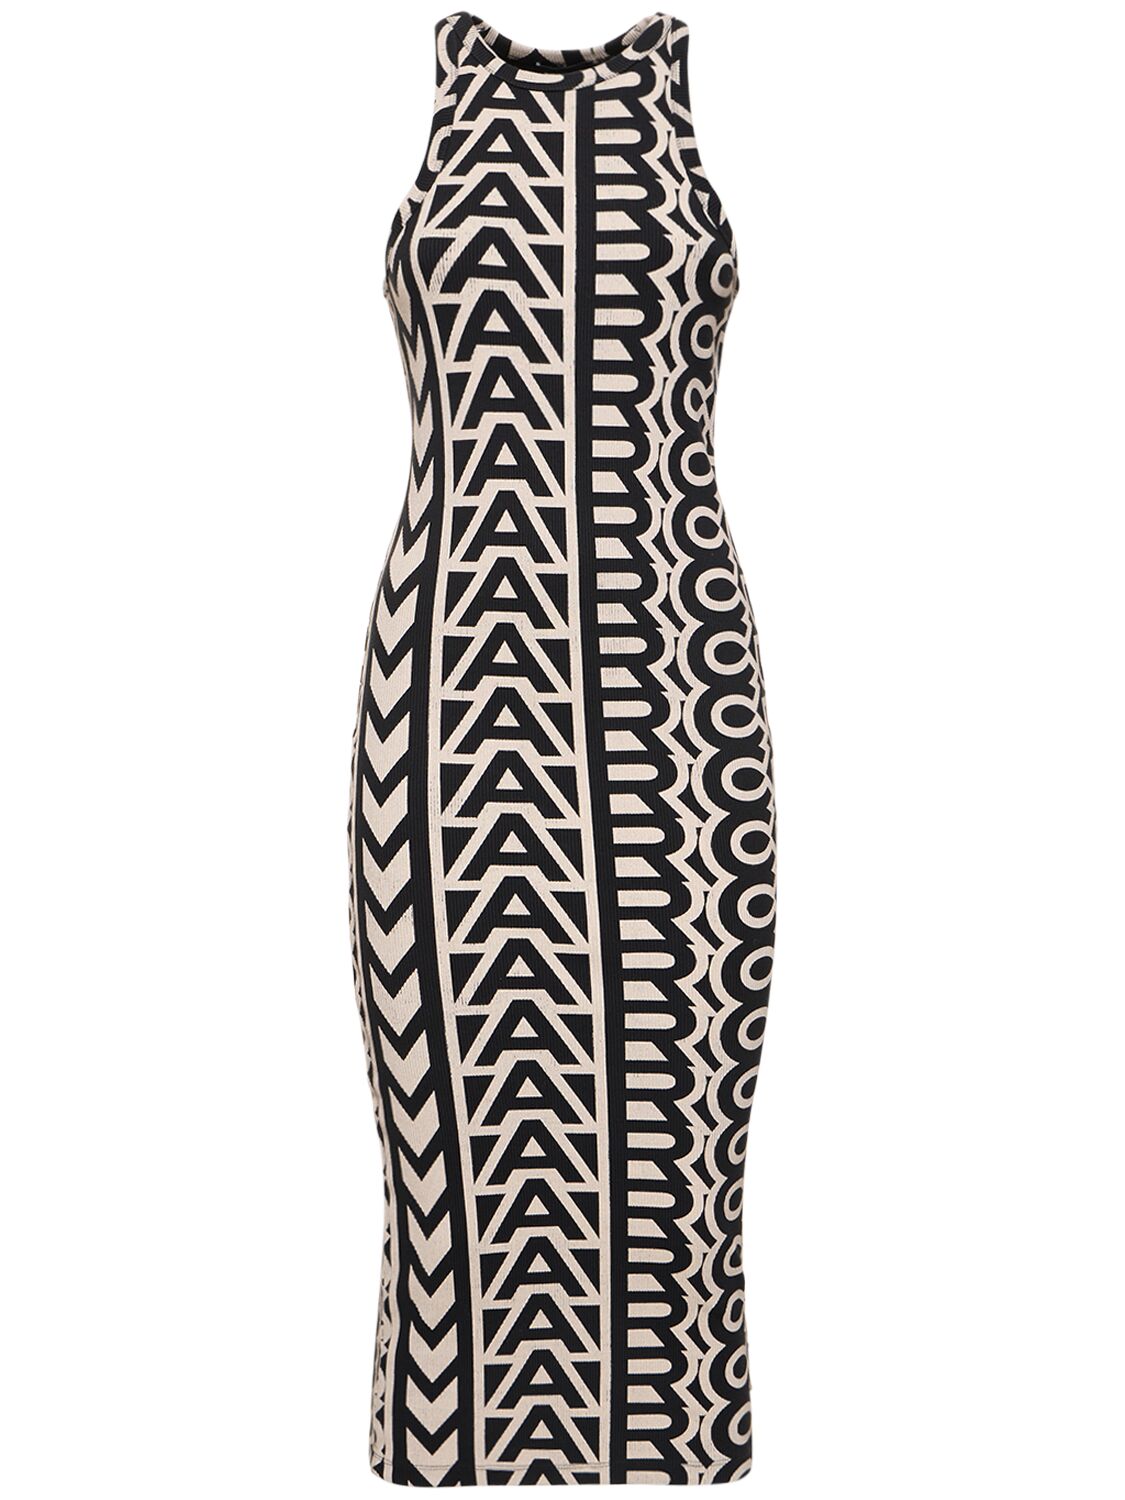 Marc Jacobs The Monogram Racer Rib Dress in Black/Ivory, Size Xs